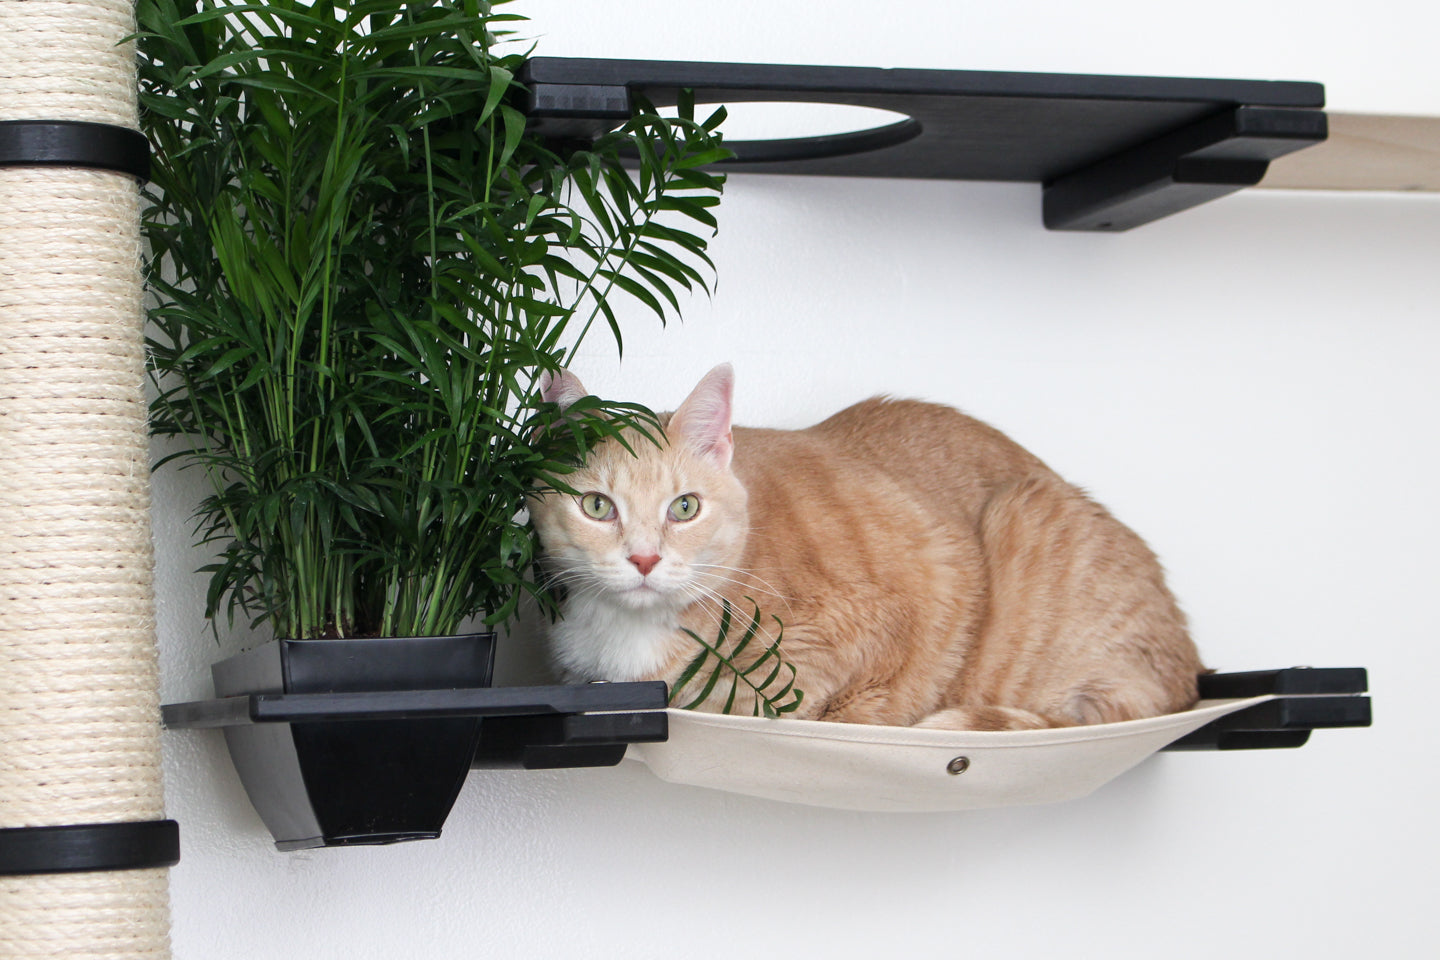 cat curled up on cat hammock with planter